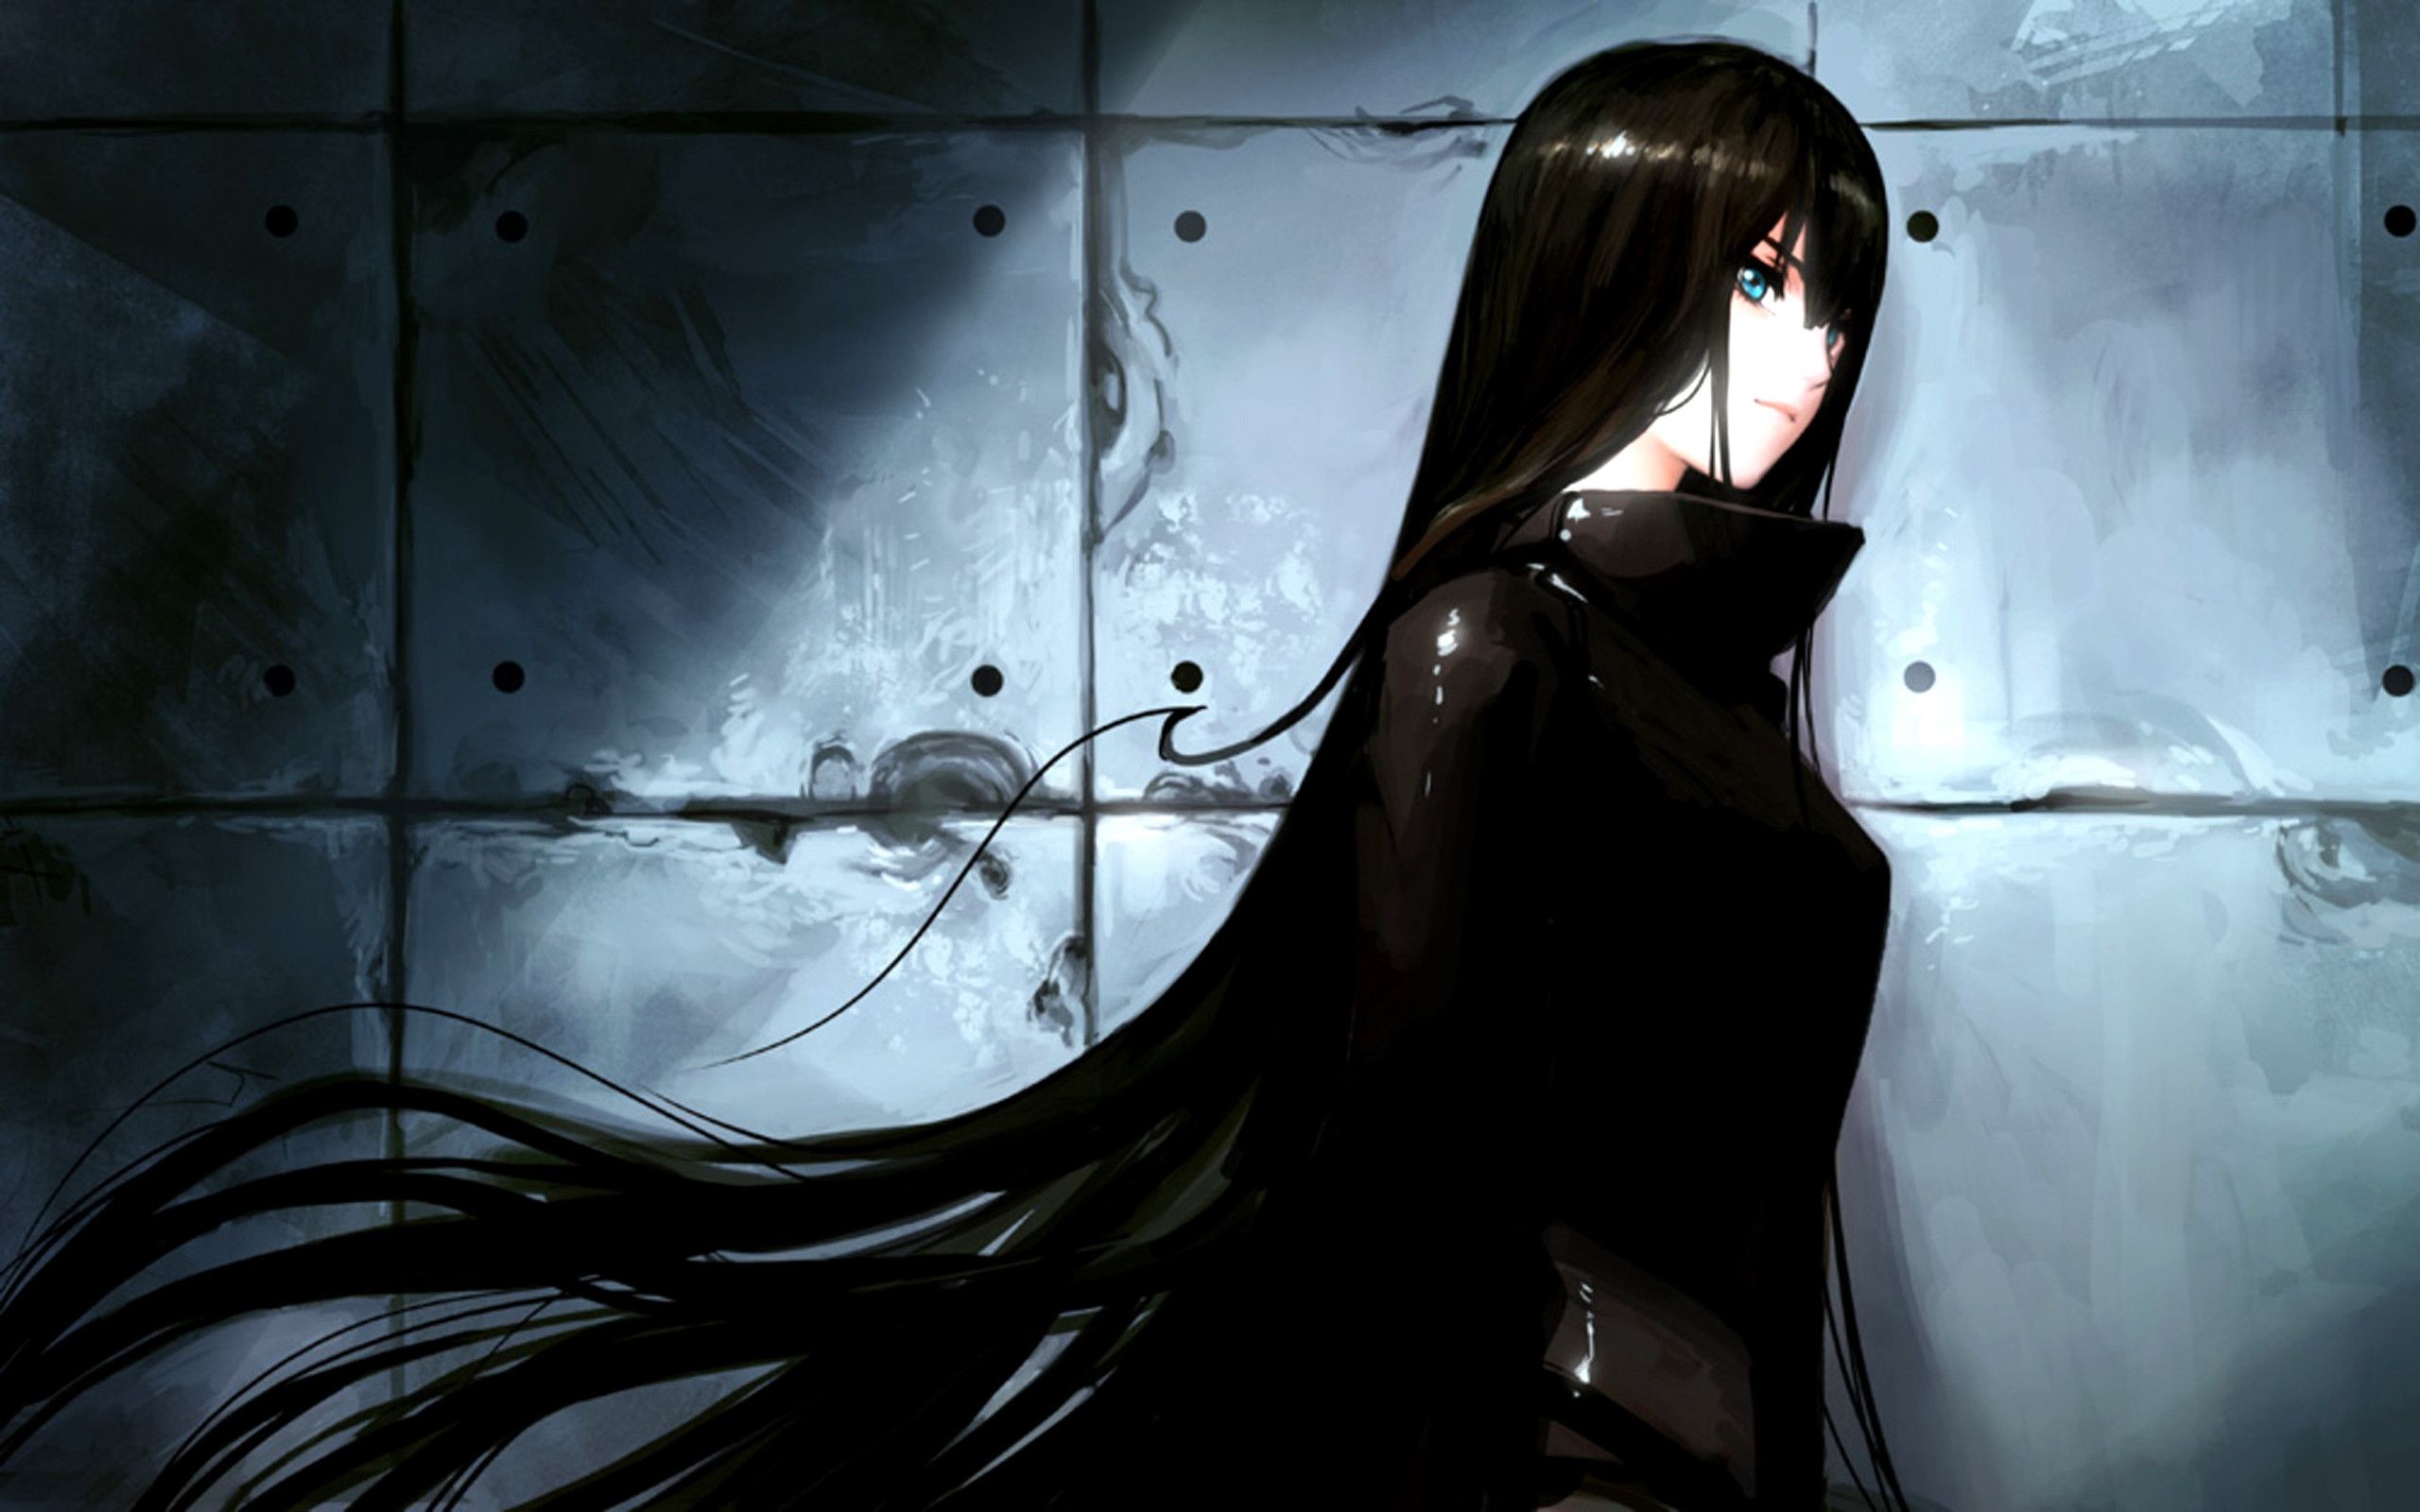 Gothic Anime Wallpaper Hd Cool Images Download Amazing - Sexy Anime Girl  With Black Hair - 2560x1600 Wallpaper 